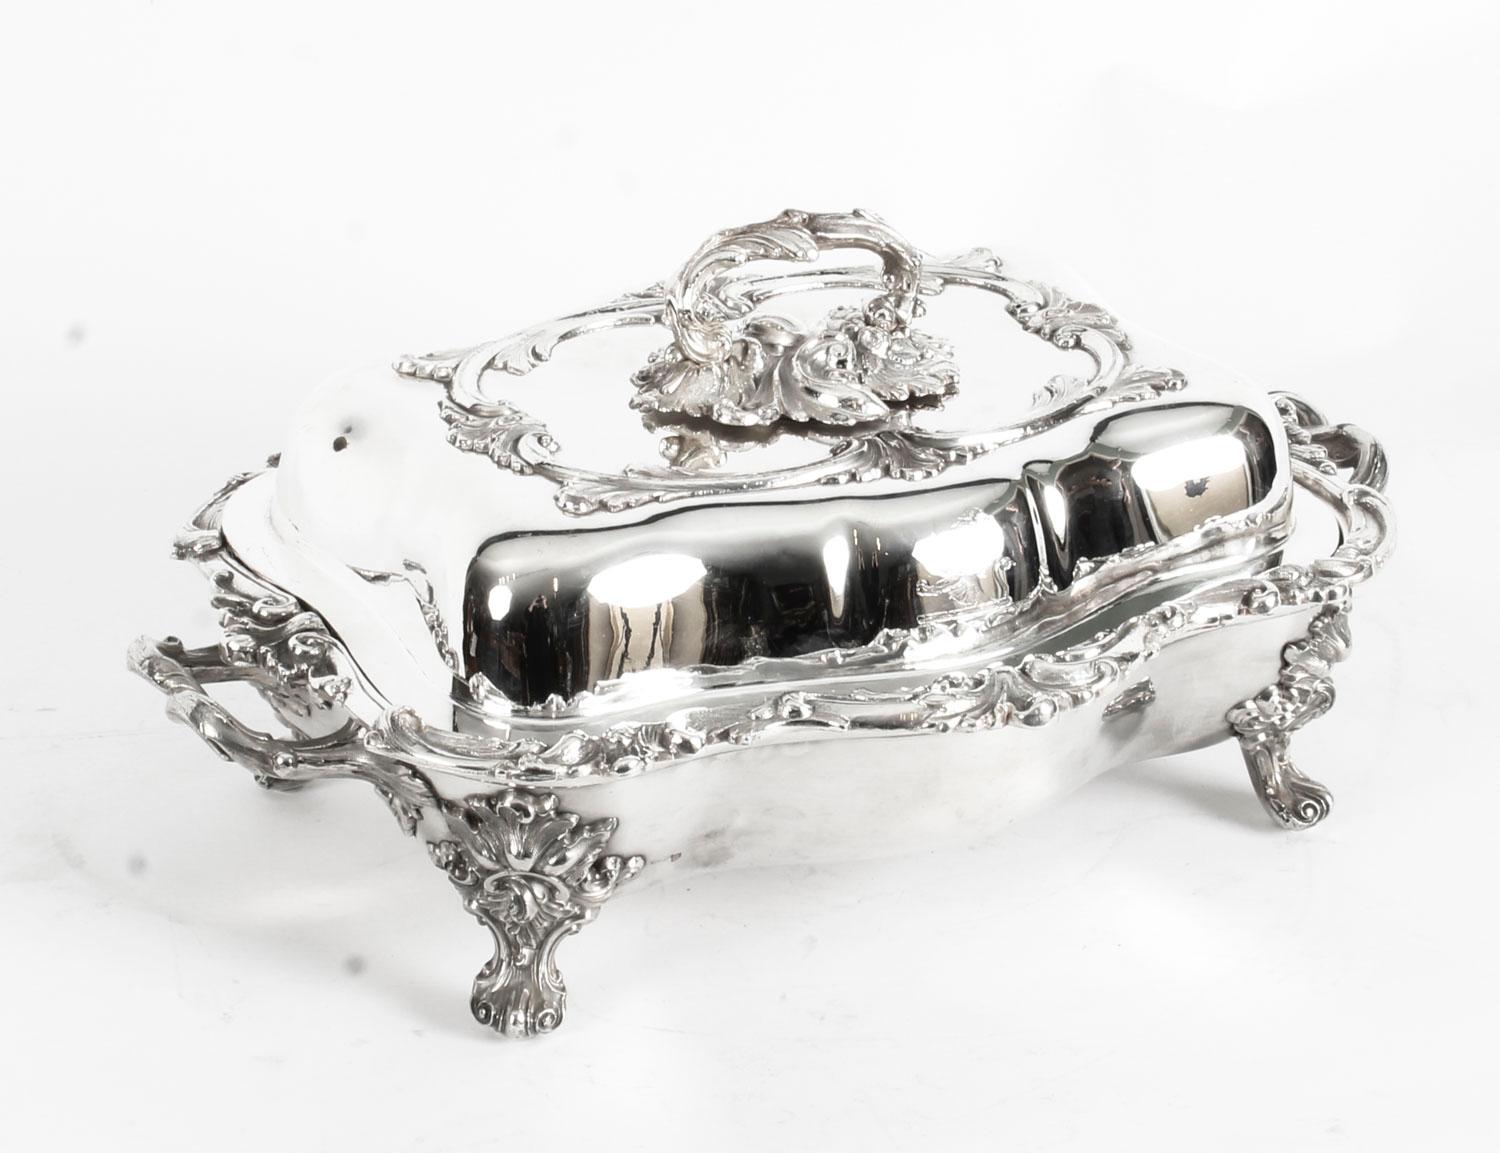 This is an exquisitely high-quality and rare antique pair of English Old Sheffield silver plated on copper entree dishes, each with lid and Stand, circa 1820 in date, and bearing the early Old Sheffield makers mark of James Dixon & Sons.

These